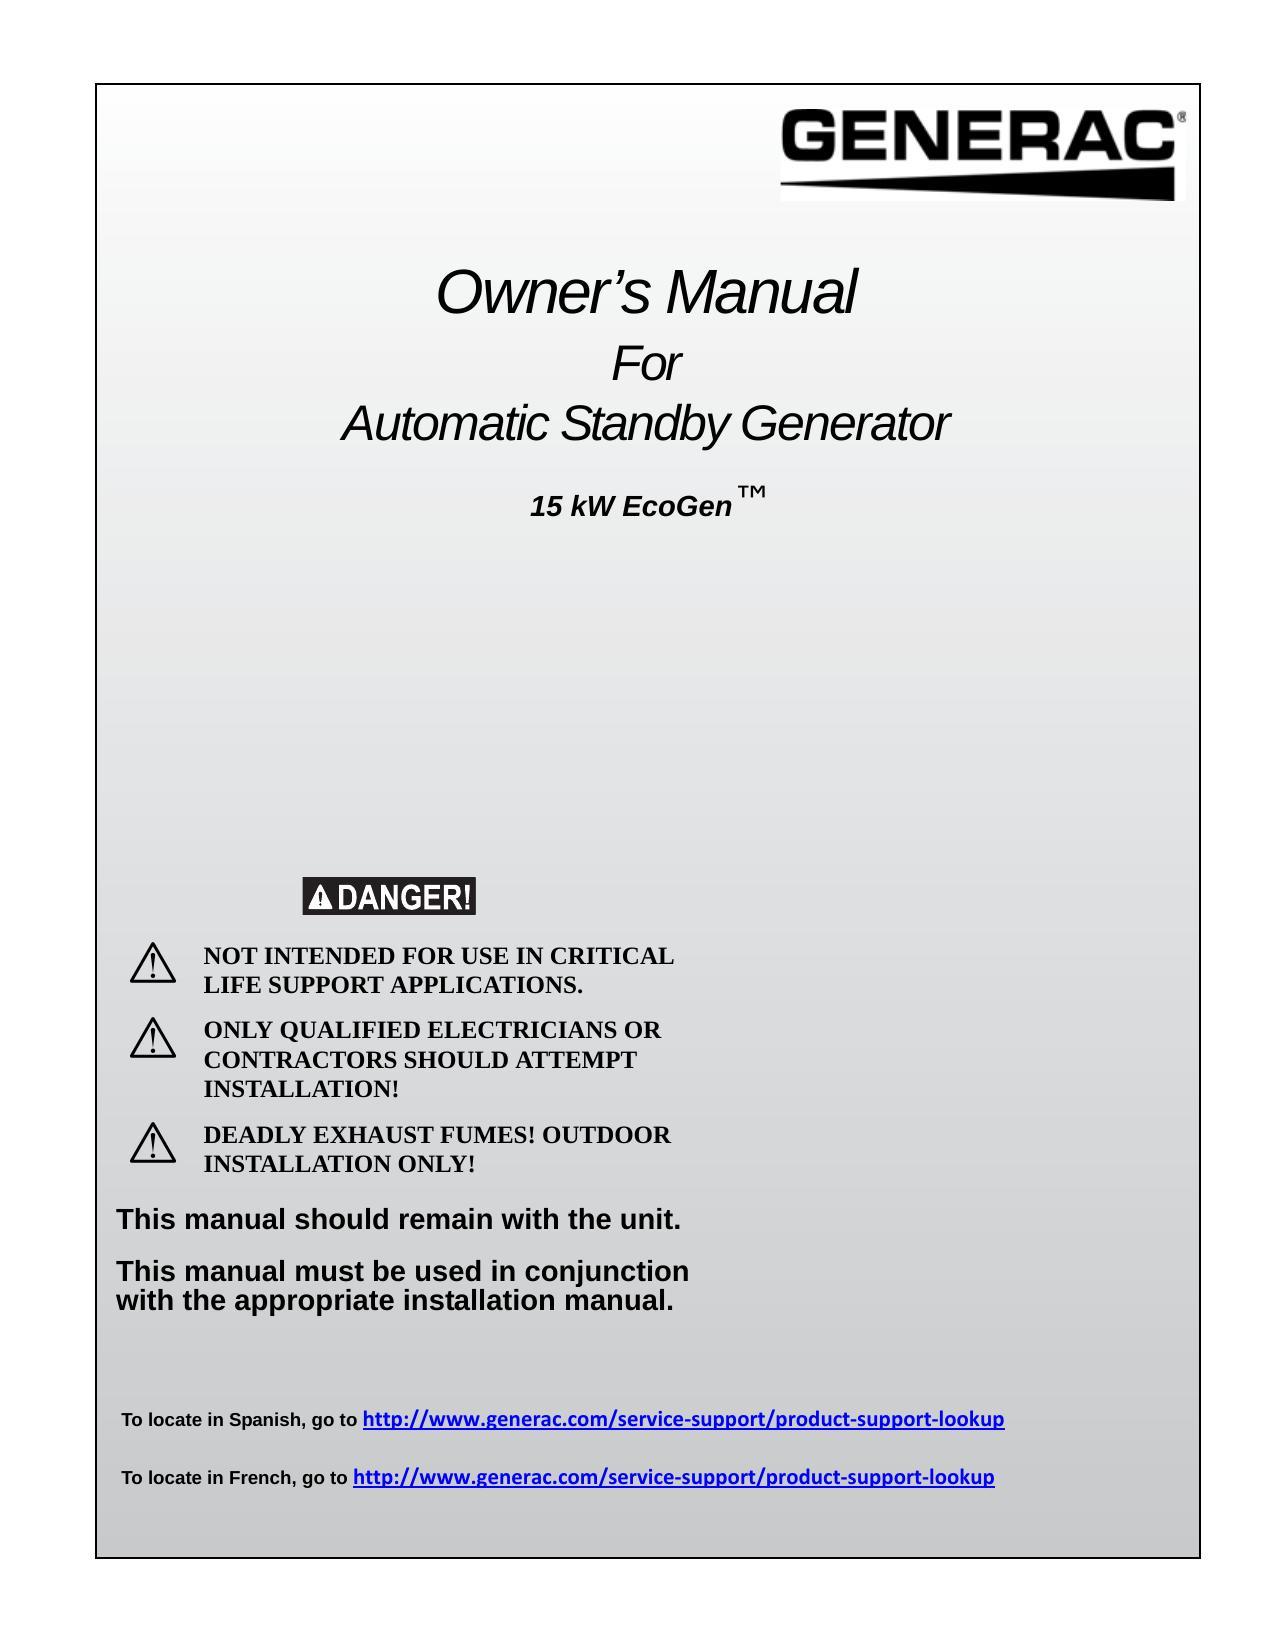 ecogen-automatic-standby-generator-owners-manual.pdf